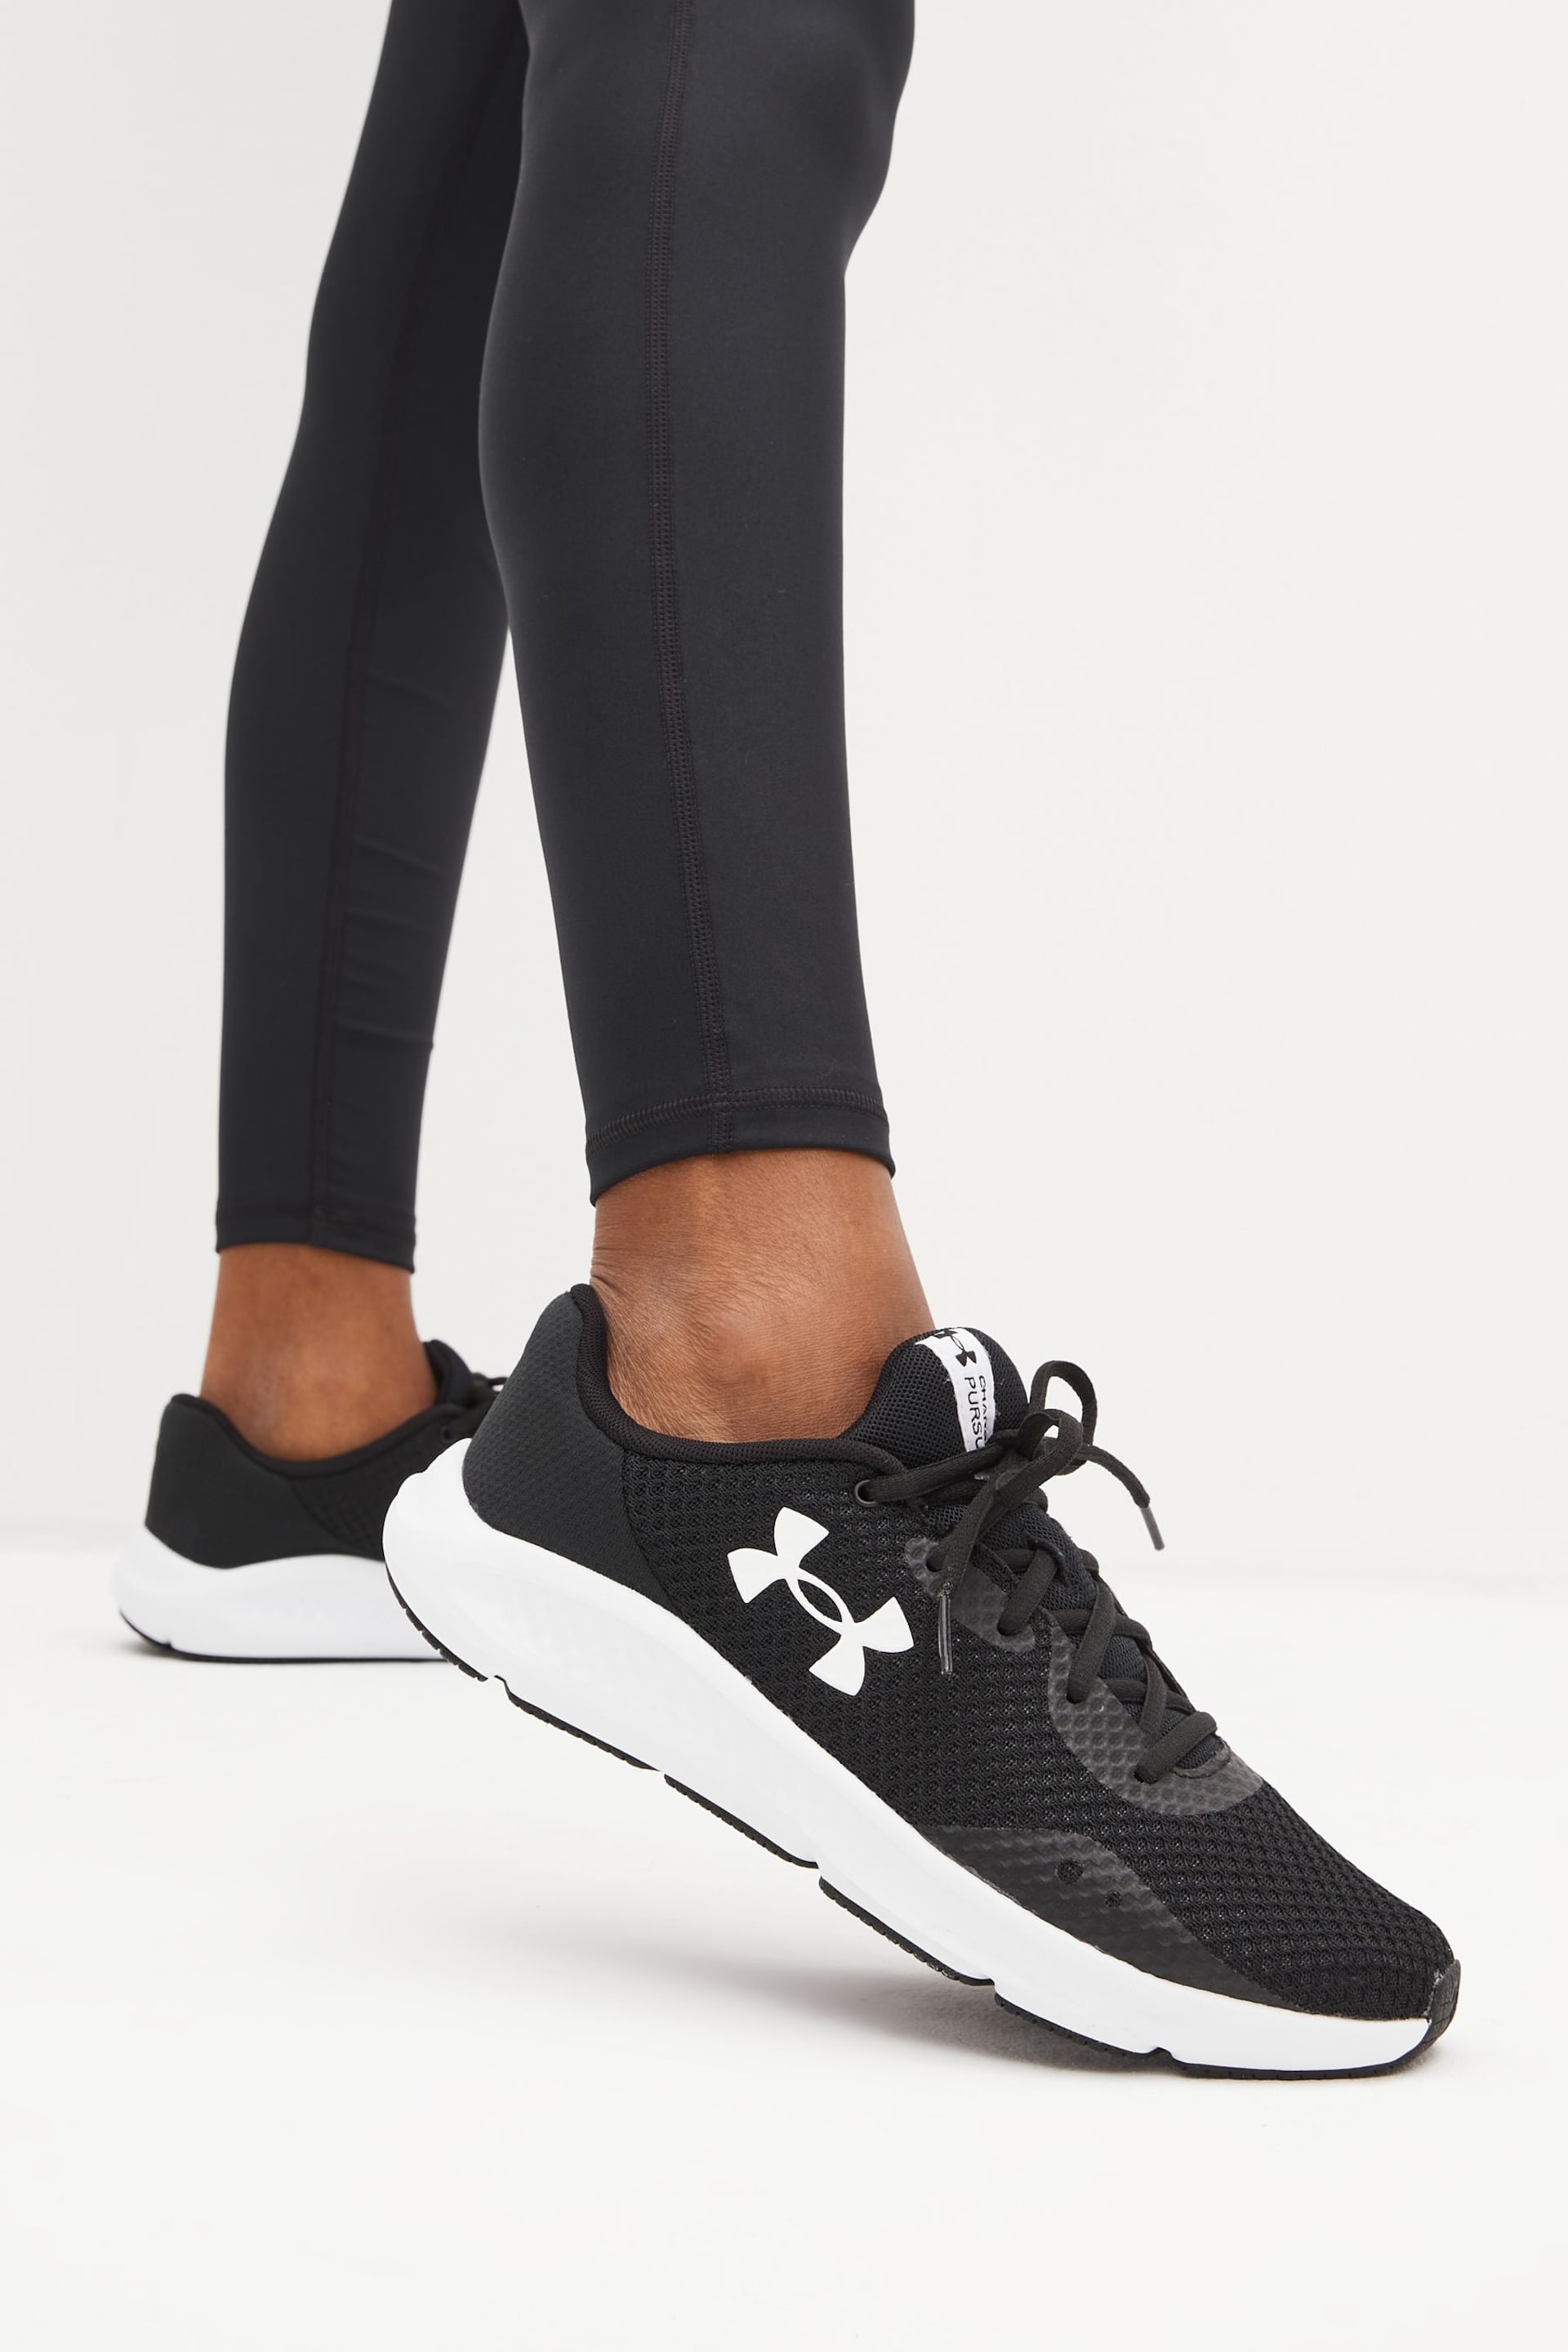 Under Armour Black/White Charged Pursuit 3 Trainers - Image 2 of 8